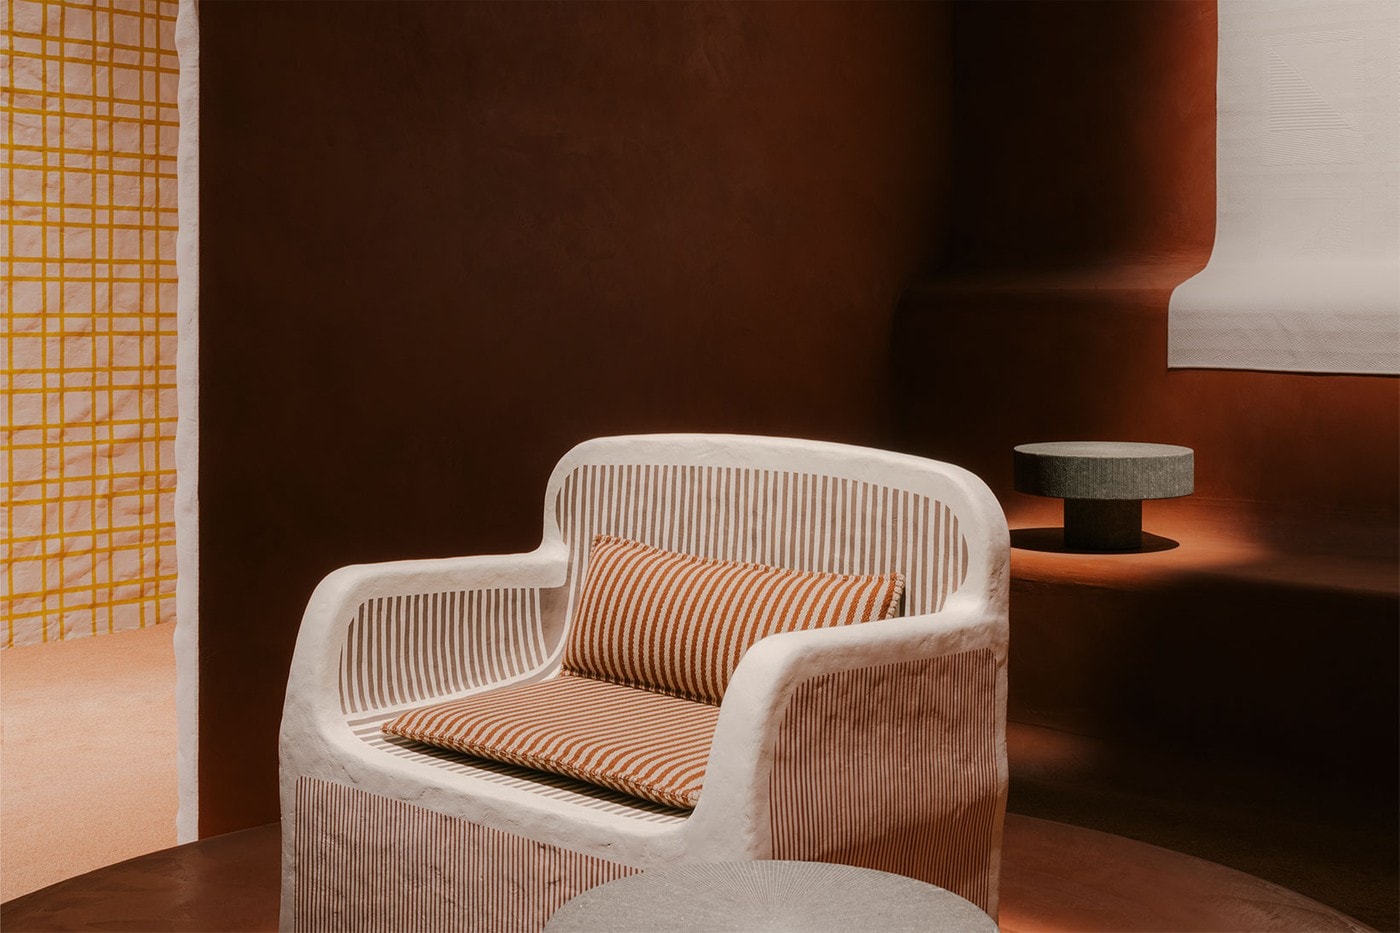 Hermès Milan Design Week Homeware Interior Goods Furniture Luxury Luxe Goods Decor Chairs Armchairs Tables Baskets Blankets Plates Gianpaolo Pagni